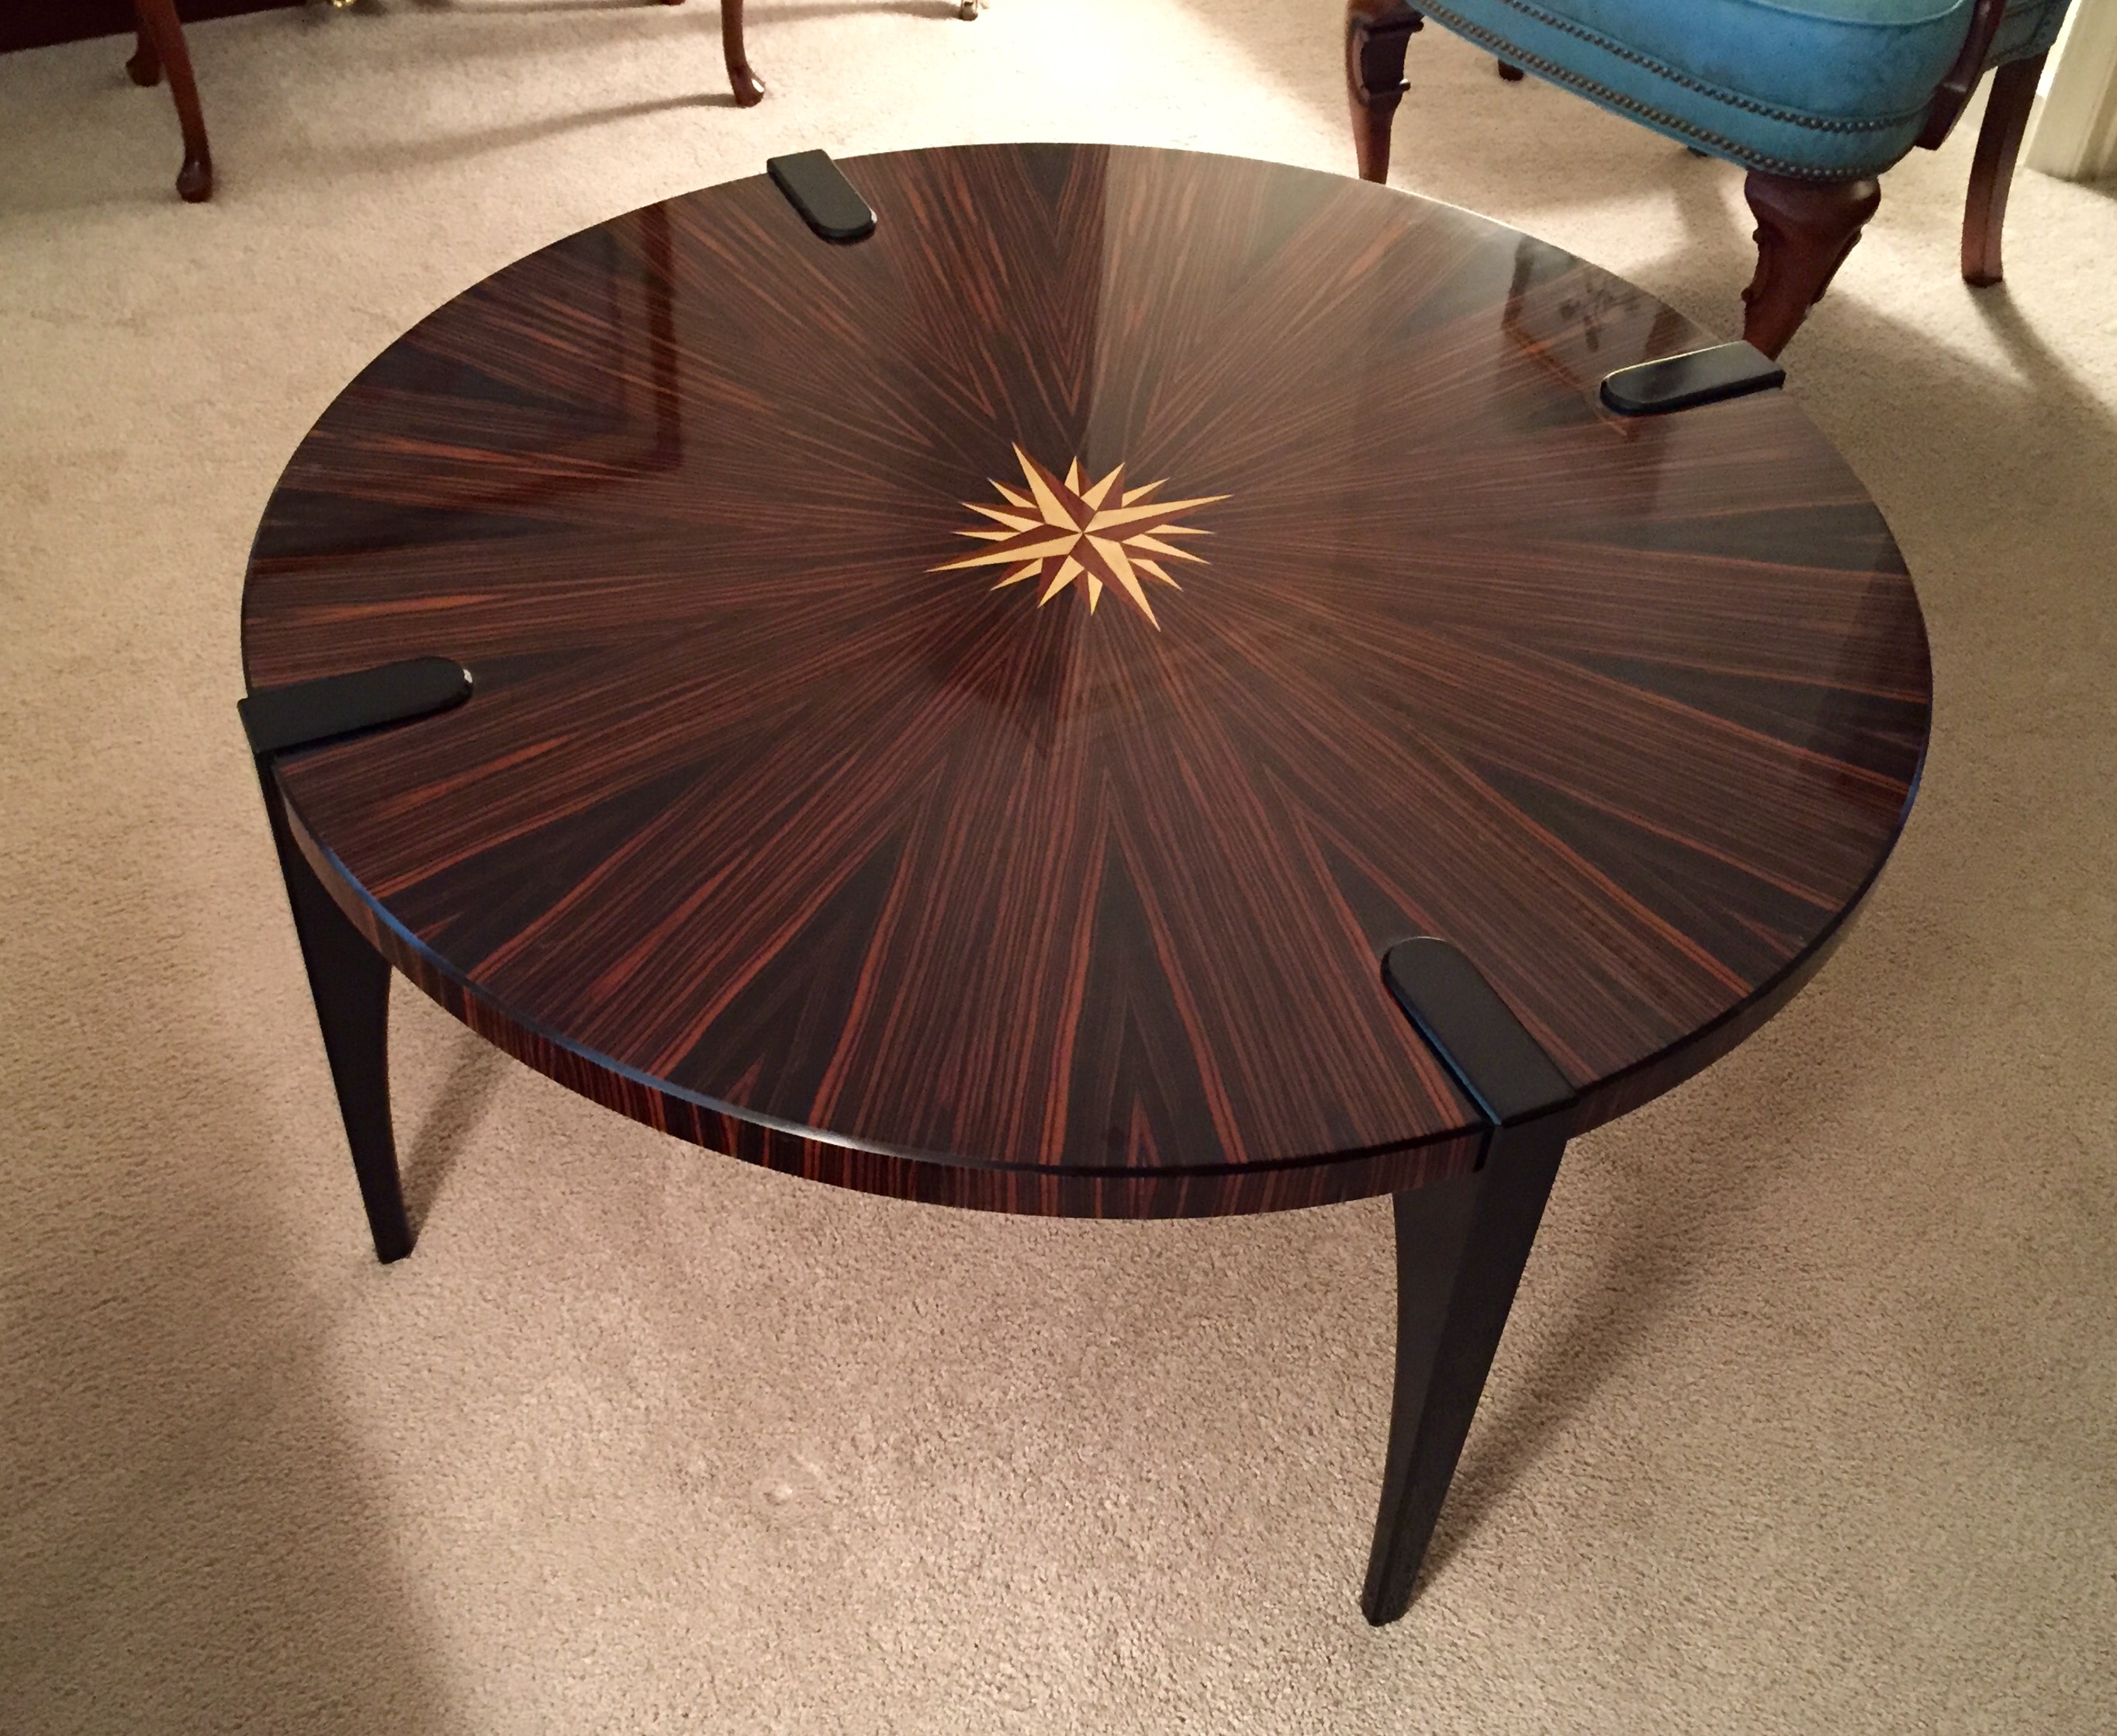 Compass Rose Coffee Table General Finishes 2018 Design 